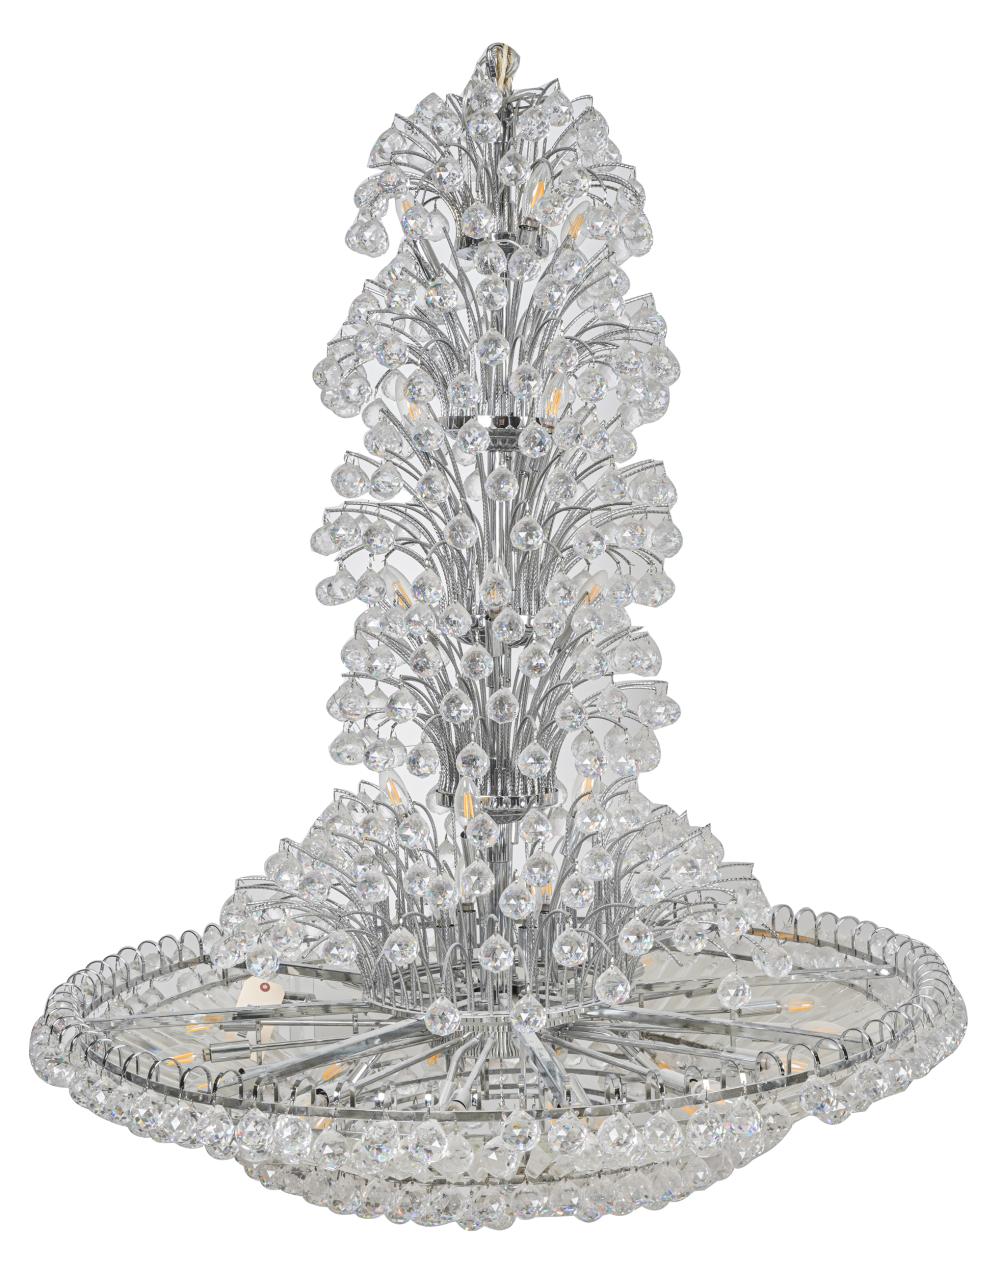 CRYSTAL CHANDELIERwith prism crystals 331267